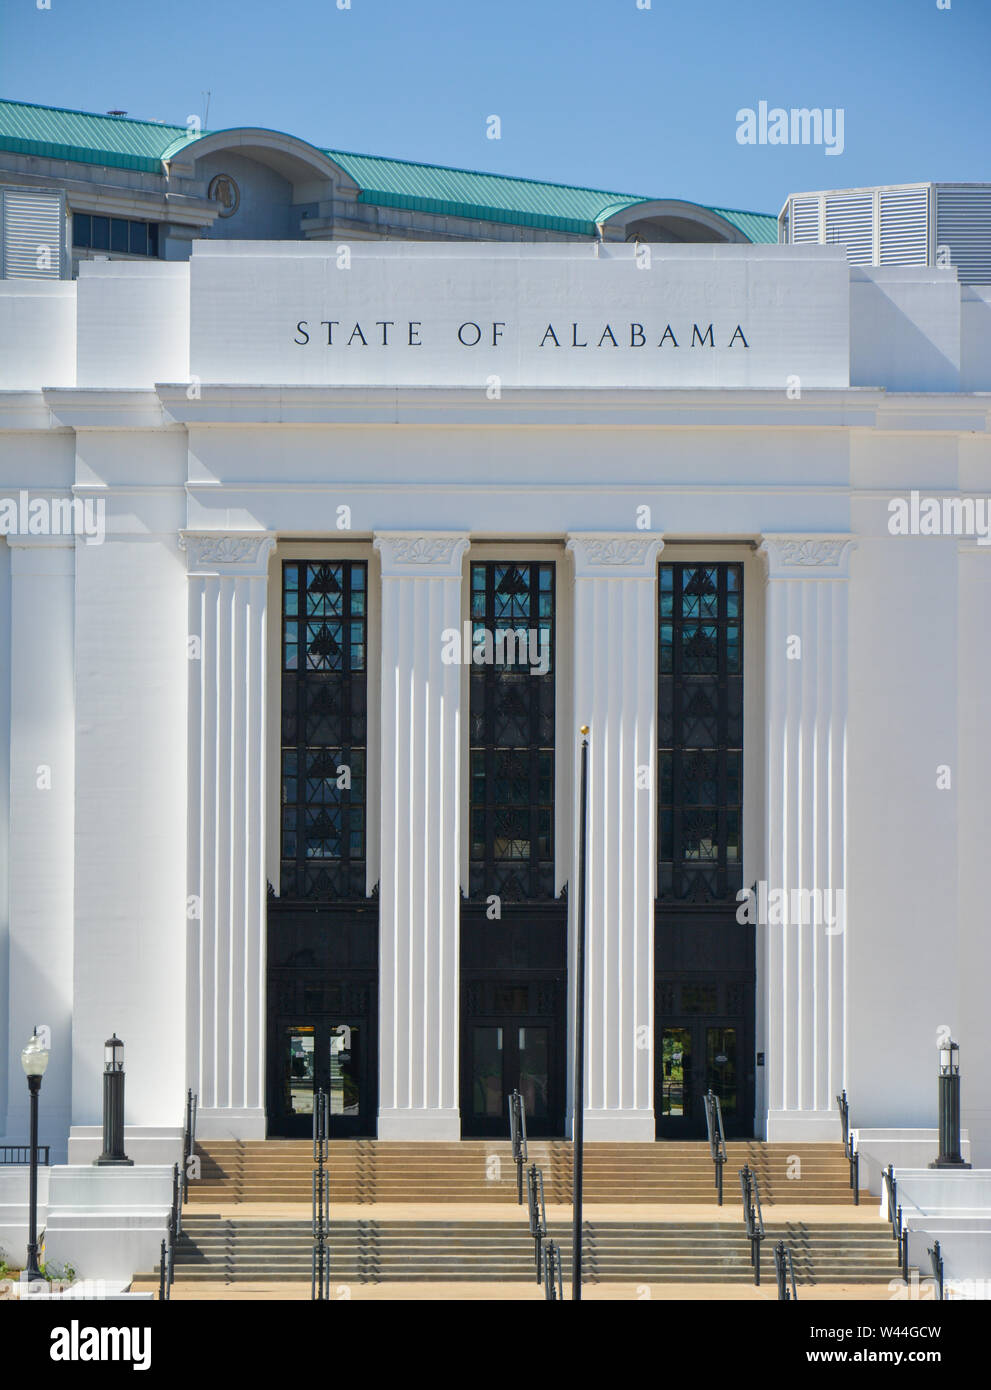 The Justice Department for the State of Alabama building, where the Attorney General has offices in the state capitol of Montgomery, AL, USA Stock Photo